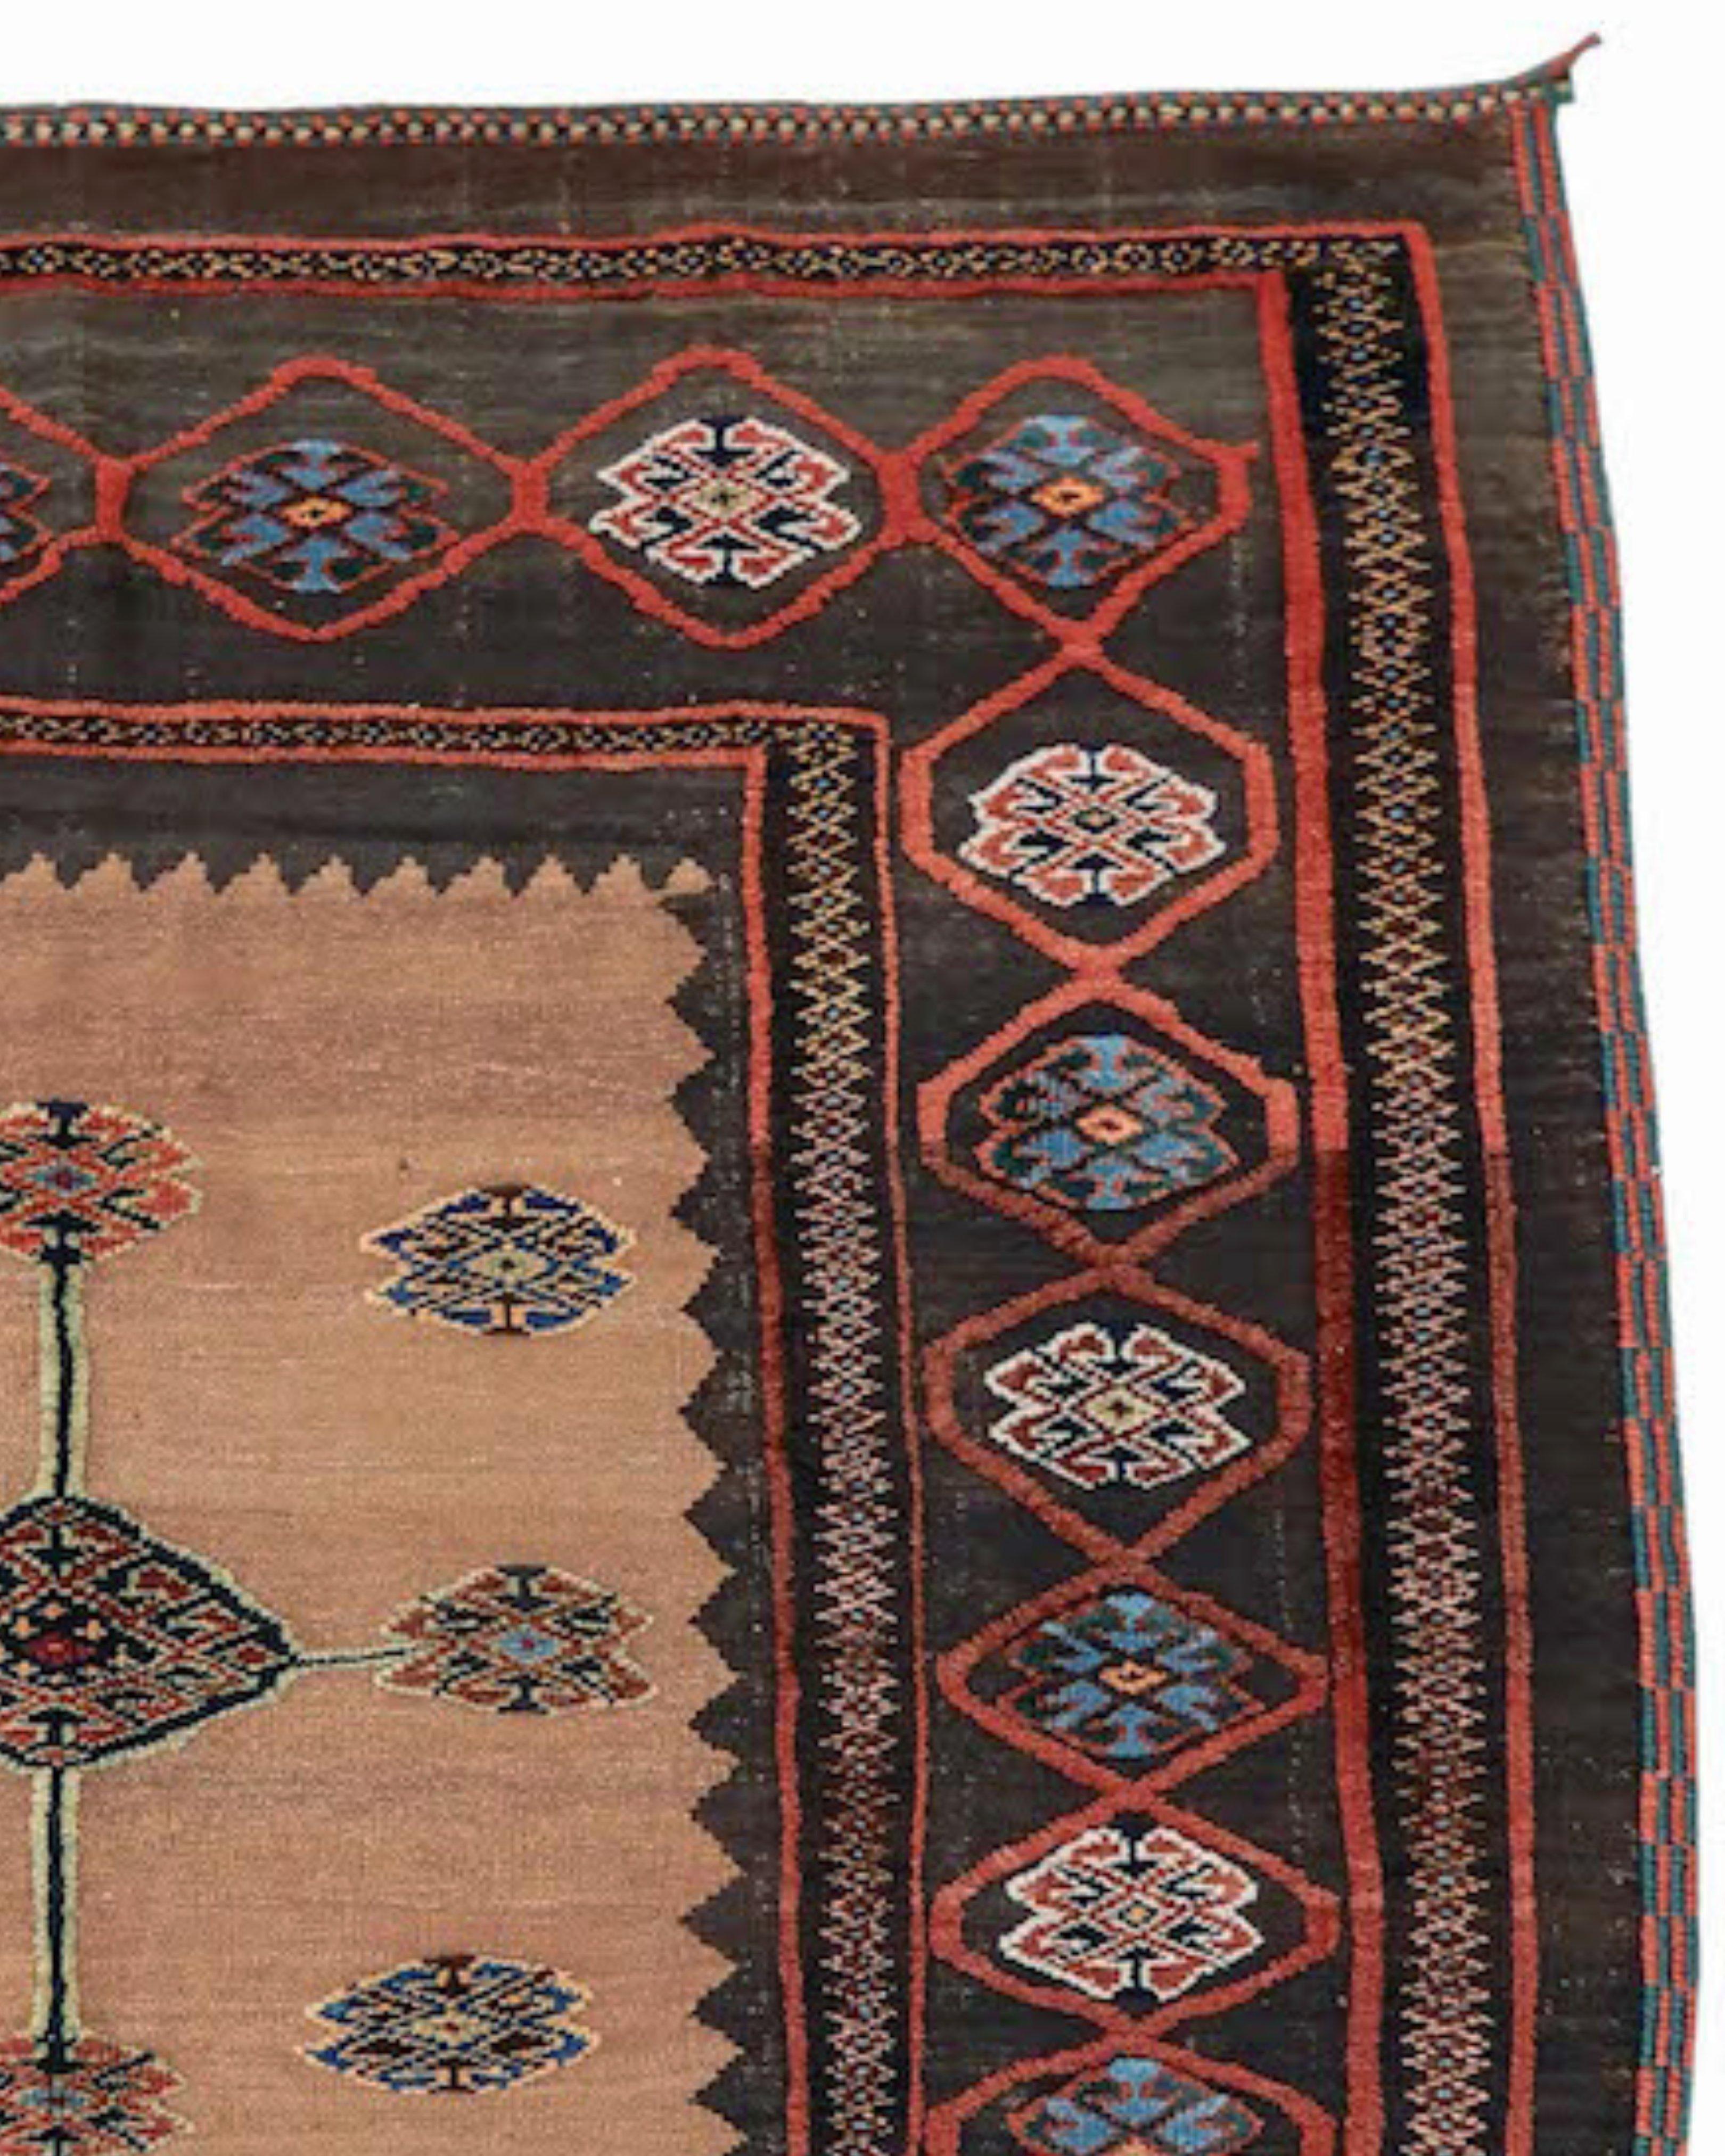 Luri soffreh Rug, Early 20th Century

This dramatic Luri sofreh weaves a highly graphic image with a central cruciform design formed from latch hook diamonds. These motifs are drawn in thick, lustrous pile against a flat woven camel field. A